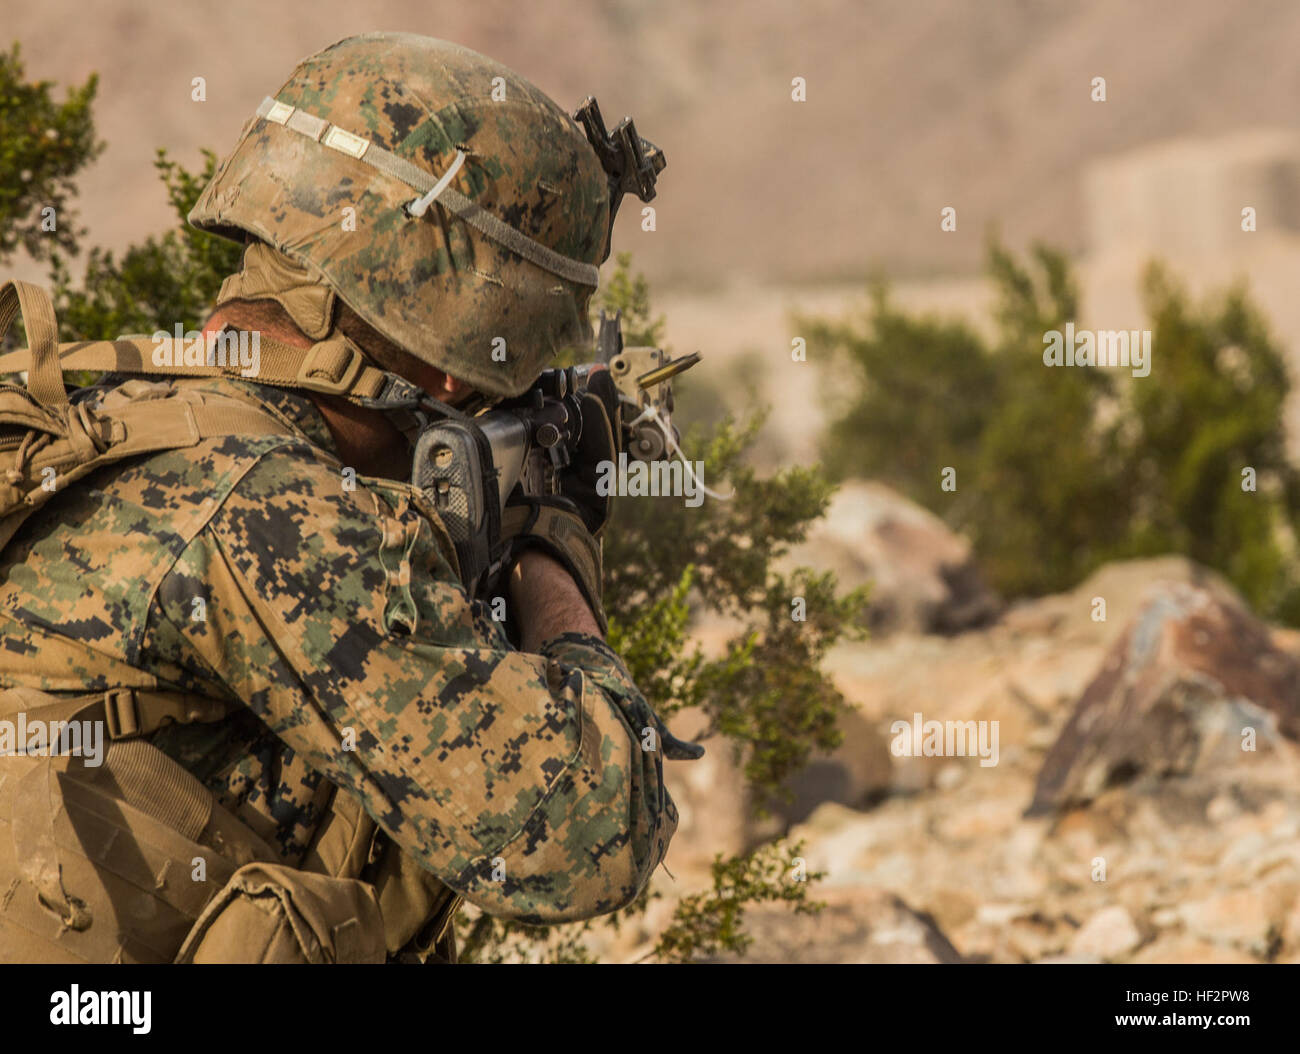 U.S. Marine Lance Cpl. Jonathan Ladowski engages targets during a combined arms exercise aboard Marine Corps Air Ground Combat Center, Twentynine Palms, Calif., Dec. 15, 2014. Ladowski is a rifleman with Battalion Landing Team 3rd Battalion, 1st Marine Regiment, 15th Marine Expeditionary Unit. BLT 3/1 conducted this training concurrent with the 15th MEU’s realistic urban training.  RUT prepares the 15th MEU’s Marines for their upcoming deployment, enhancing their combat skills in environments similar to those they may find in future missions. (U.S. Marine Corps Photo by Sgt. Emmanuel Ramos/Rel Stock Photo